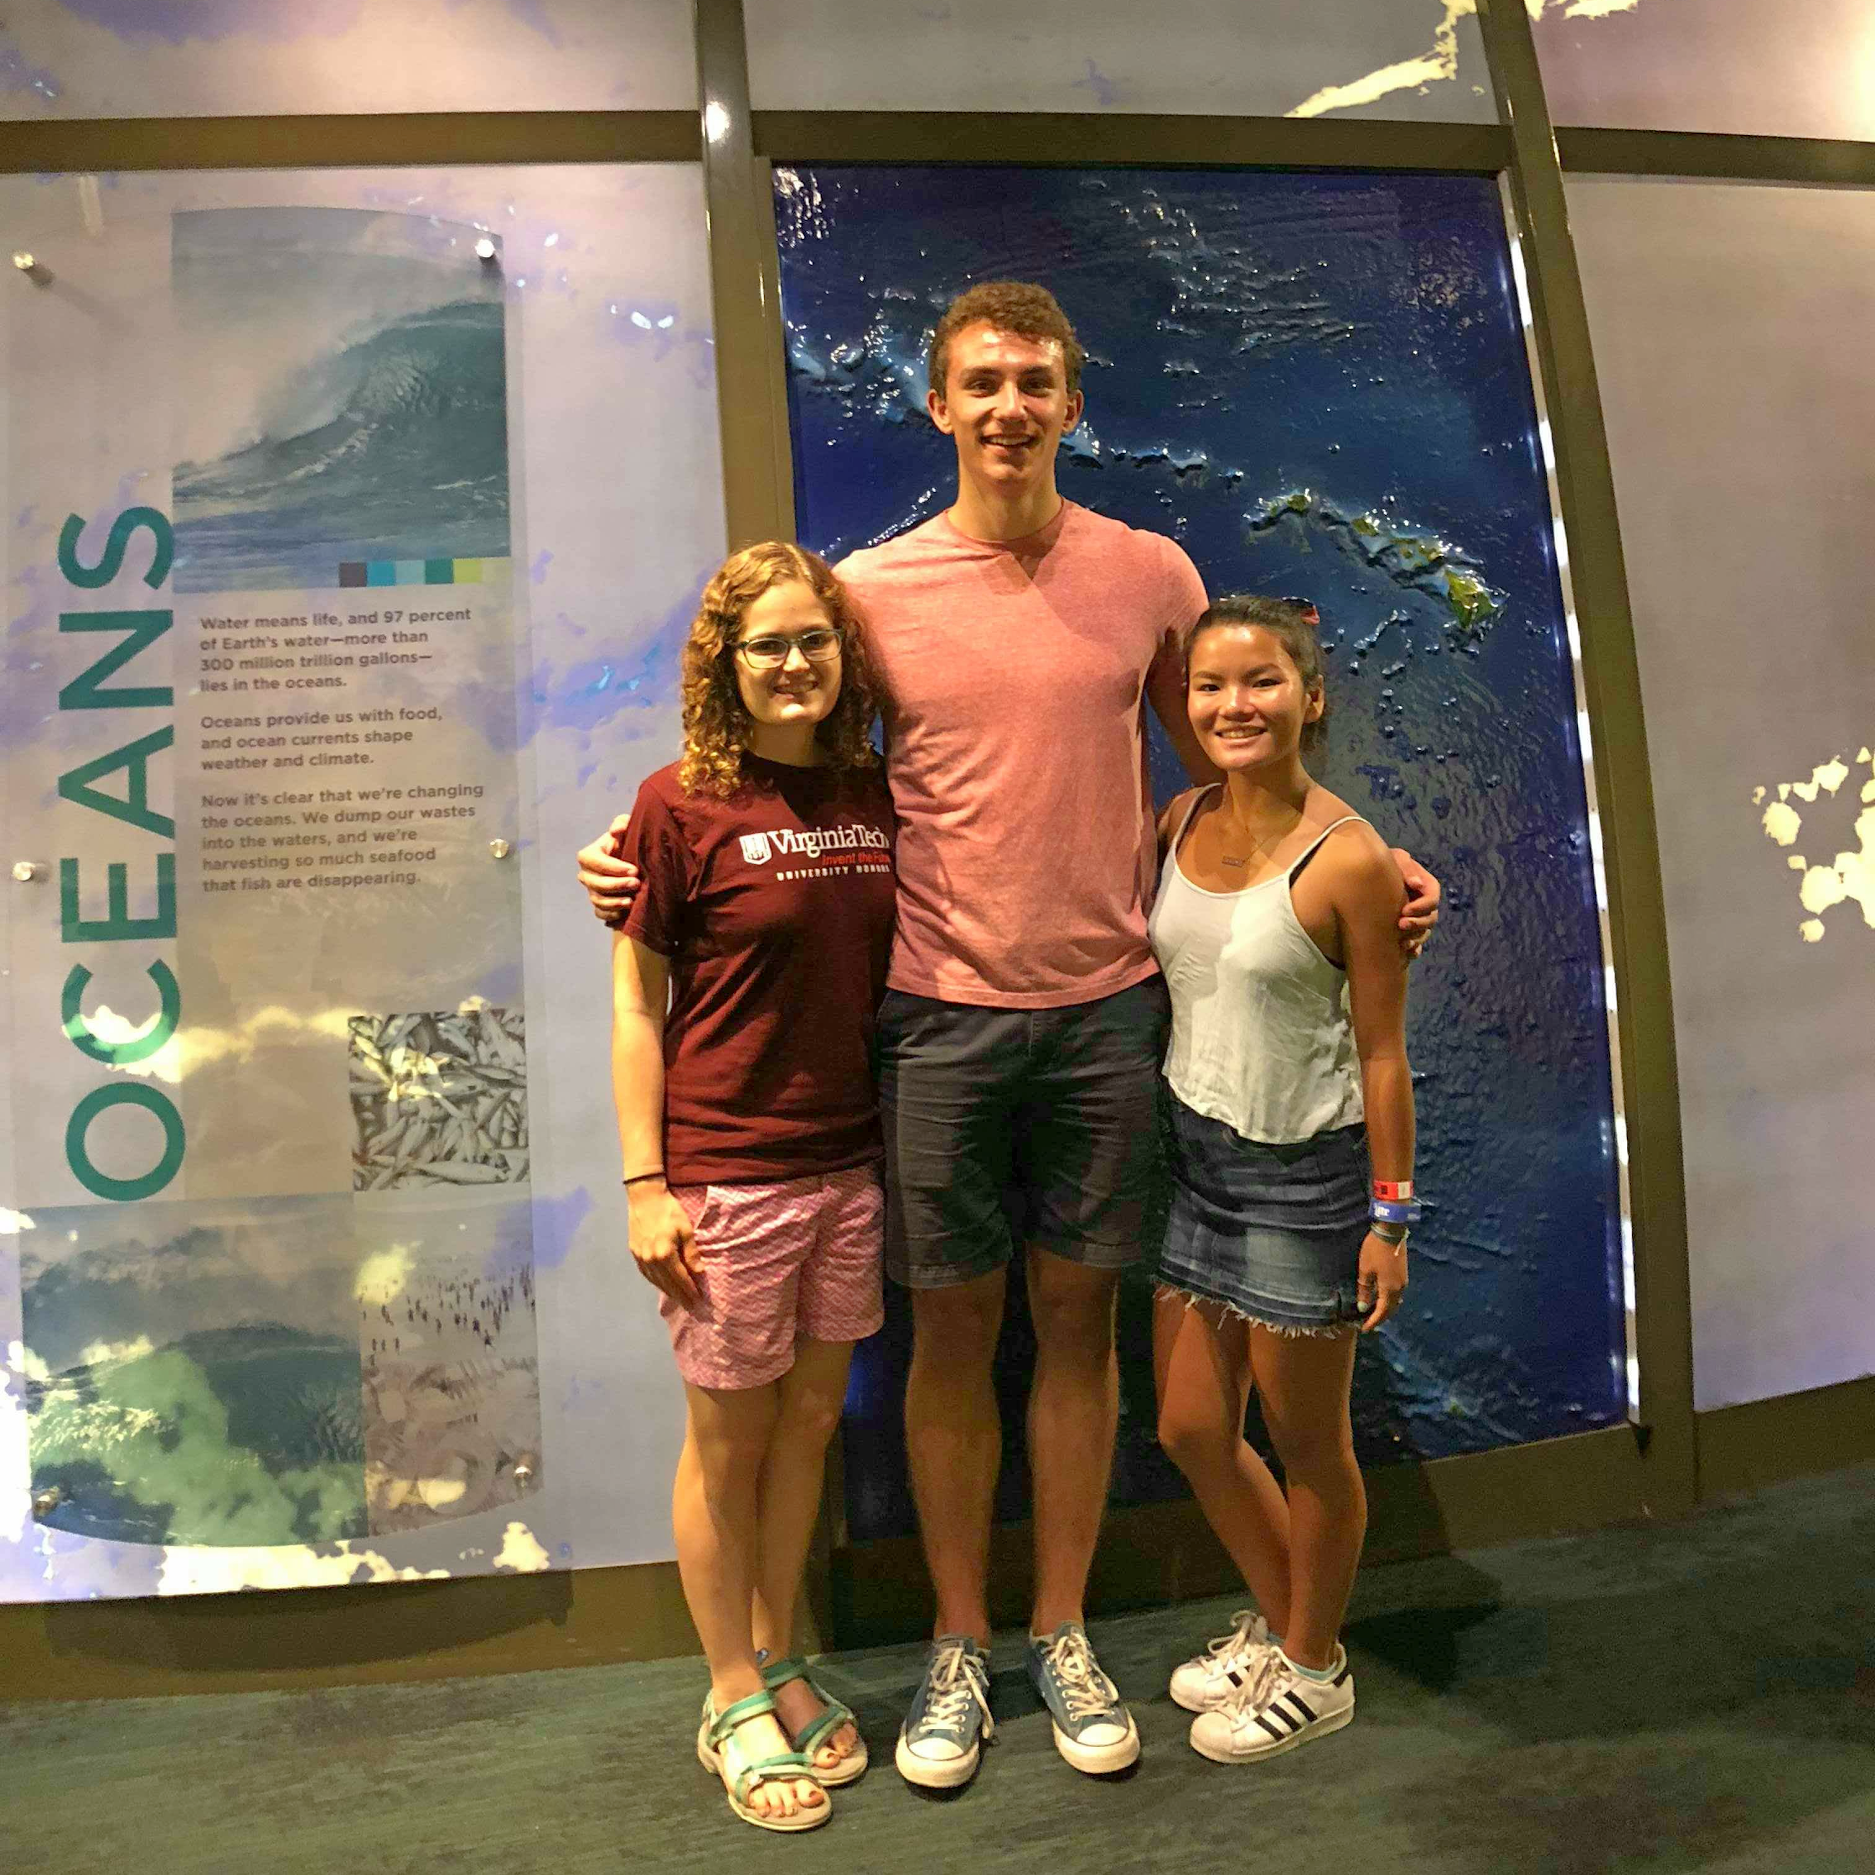 Arianna Krinos, Brett McKim, and Lily Wittle (pictured left to right) are NOAA Scholars at the NOAA Geophysical Fluid Dynamics Lab, part of NOAA Research. Arianna works on biological and biogeochemical aspects of ocean modeling, Brett's project is focused on atmospheric convection modeling, and Lily is modeling the physical oceanography of the Southern Ocean. On the Fourth of July, the three scholars visited Philadelphia, Pennsylvania, to experience Independence Day in a quintessential American landmark